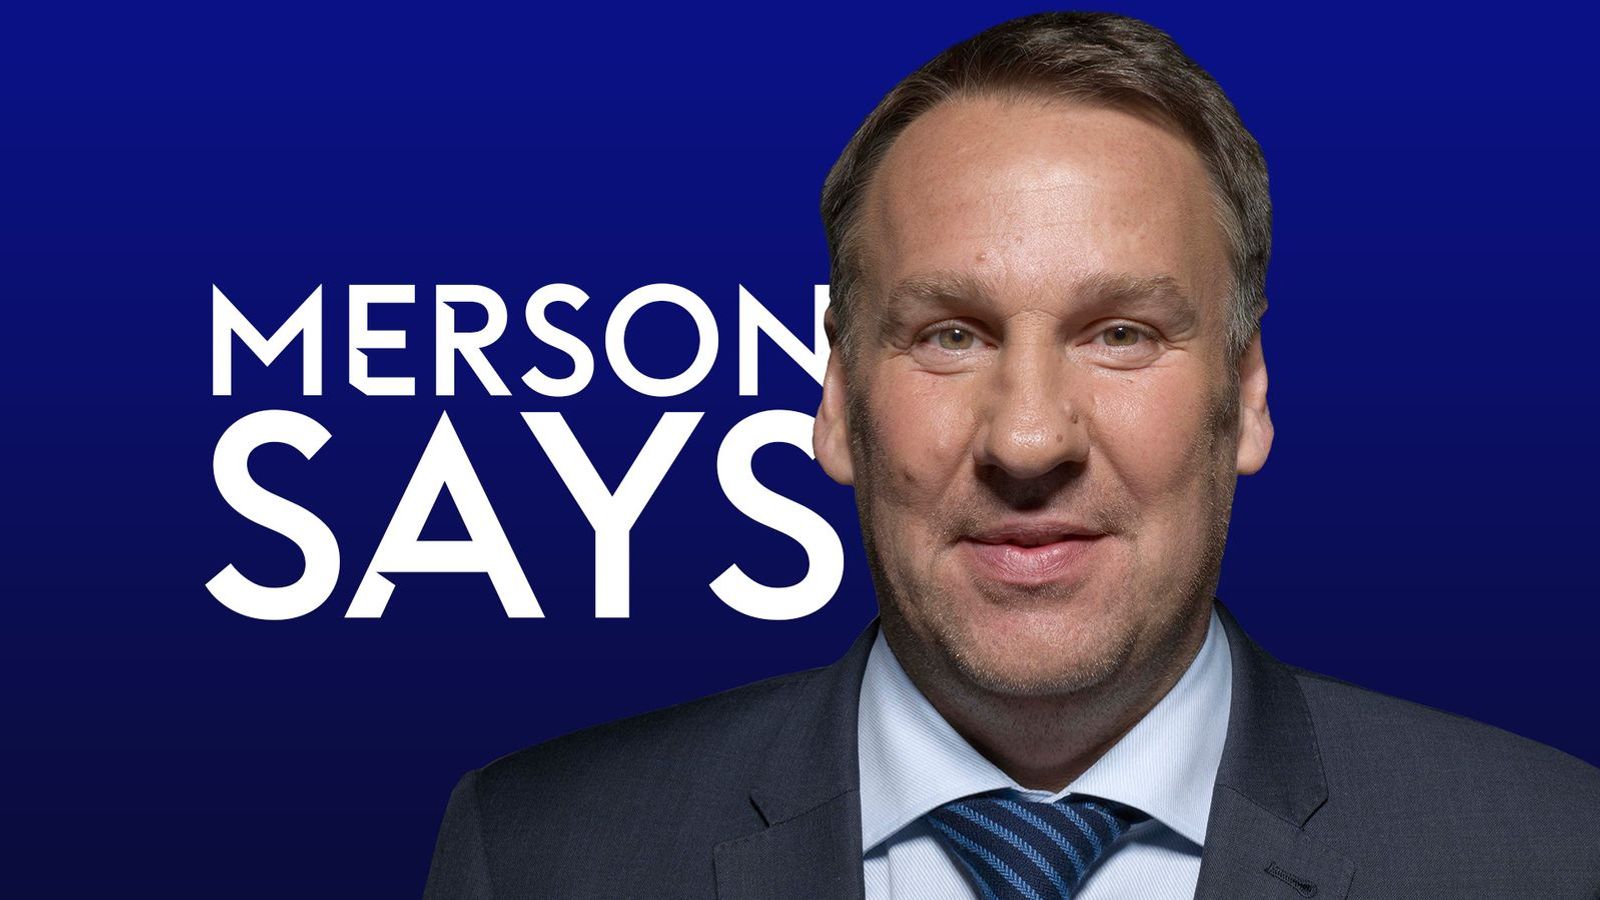 paul-merson-says-mikel-arteta-s-knee-jerk-triple-substitution-cost-arsenal-in-3-1-defeat-at-manchester-united